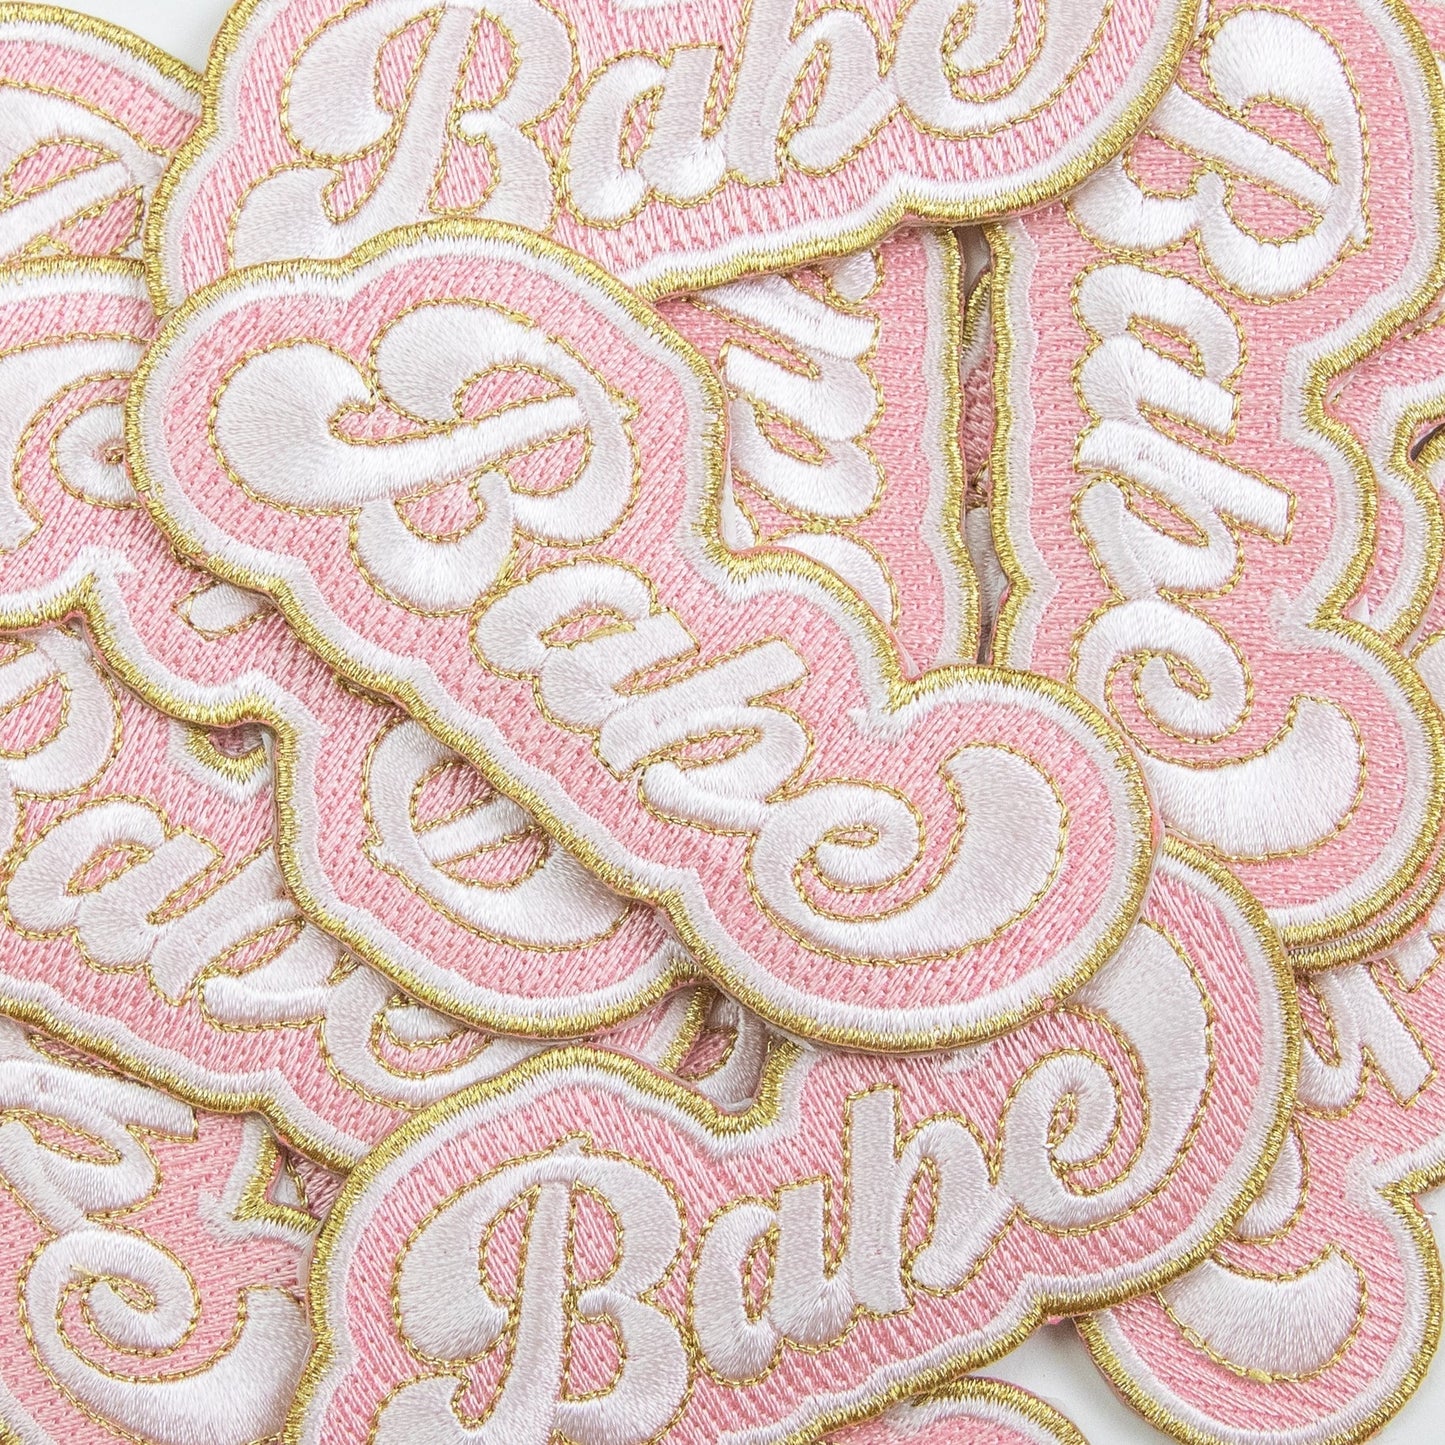 Babe Patch Embroidered Adhesive